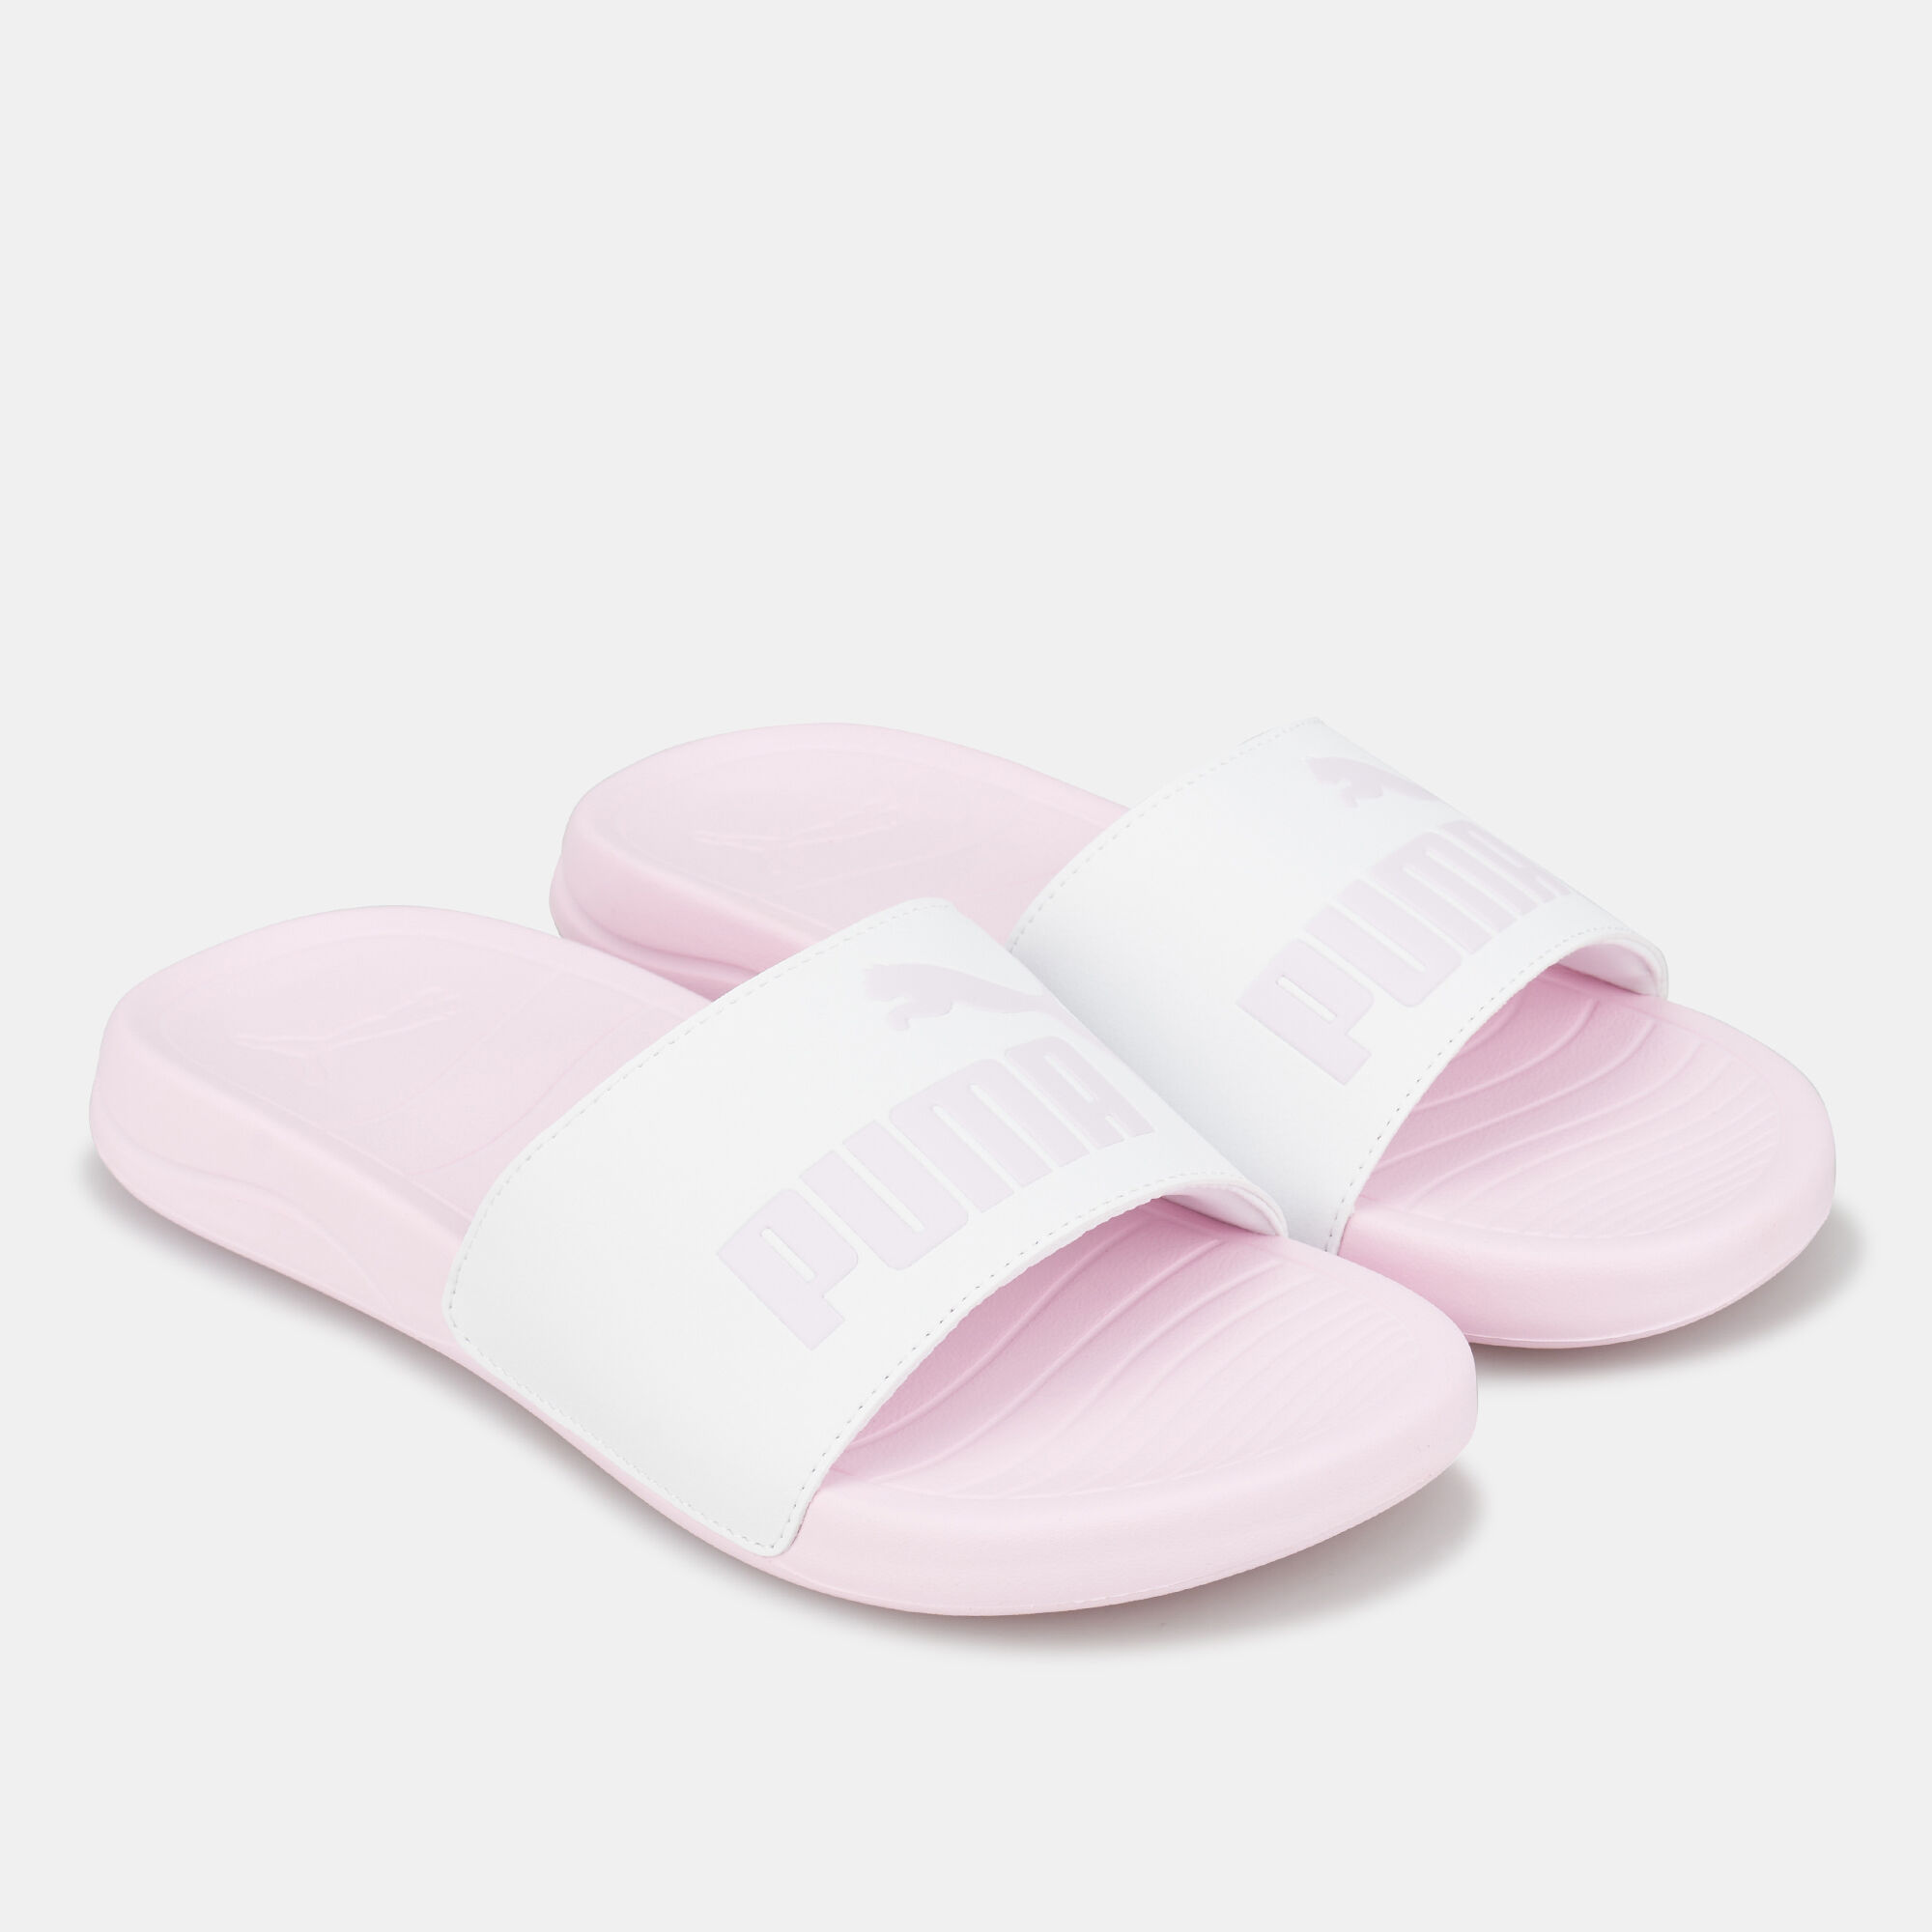 Puma Slippers - Shop Puma Slippers or Chappals Online at Best Price | Myntra